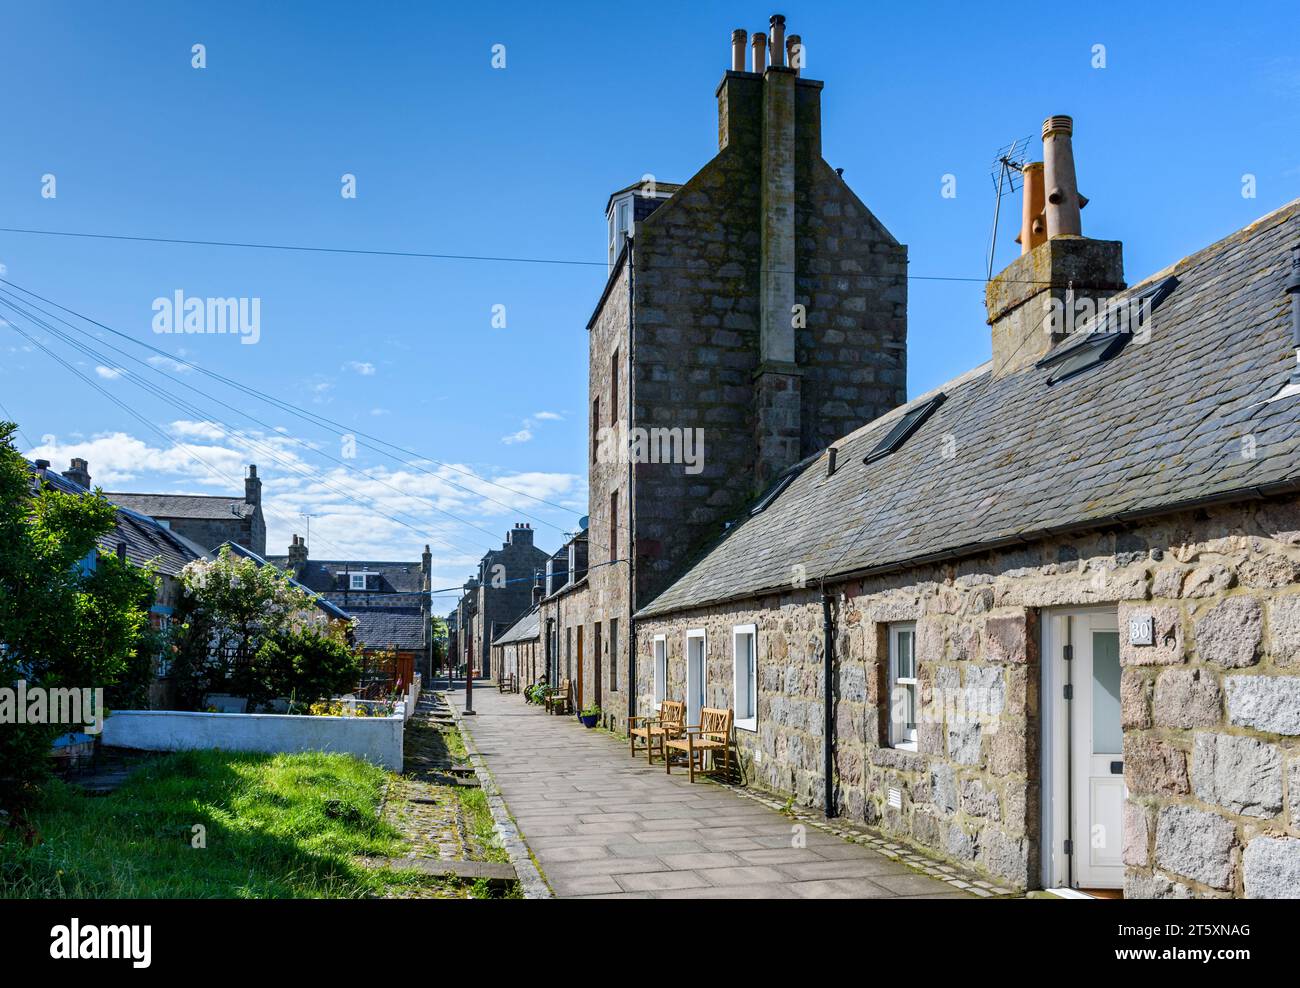 A street in the historic former fishing village of Footdee, The dwellings are laid out in squares with their backs to the sea.  Aberdeen, Scotland, UK Stock Photo